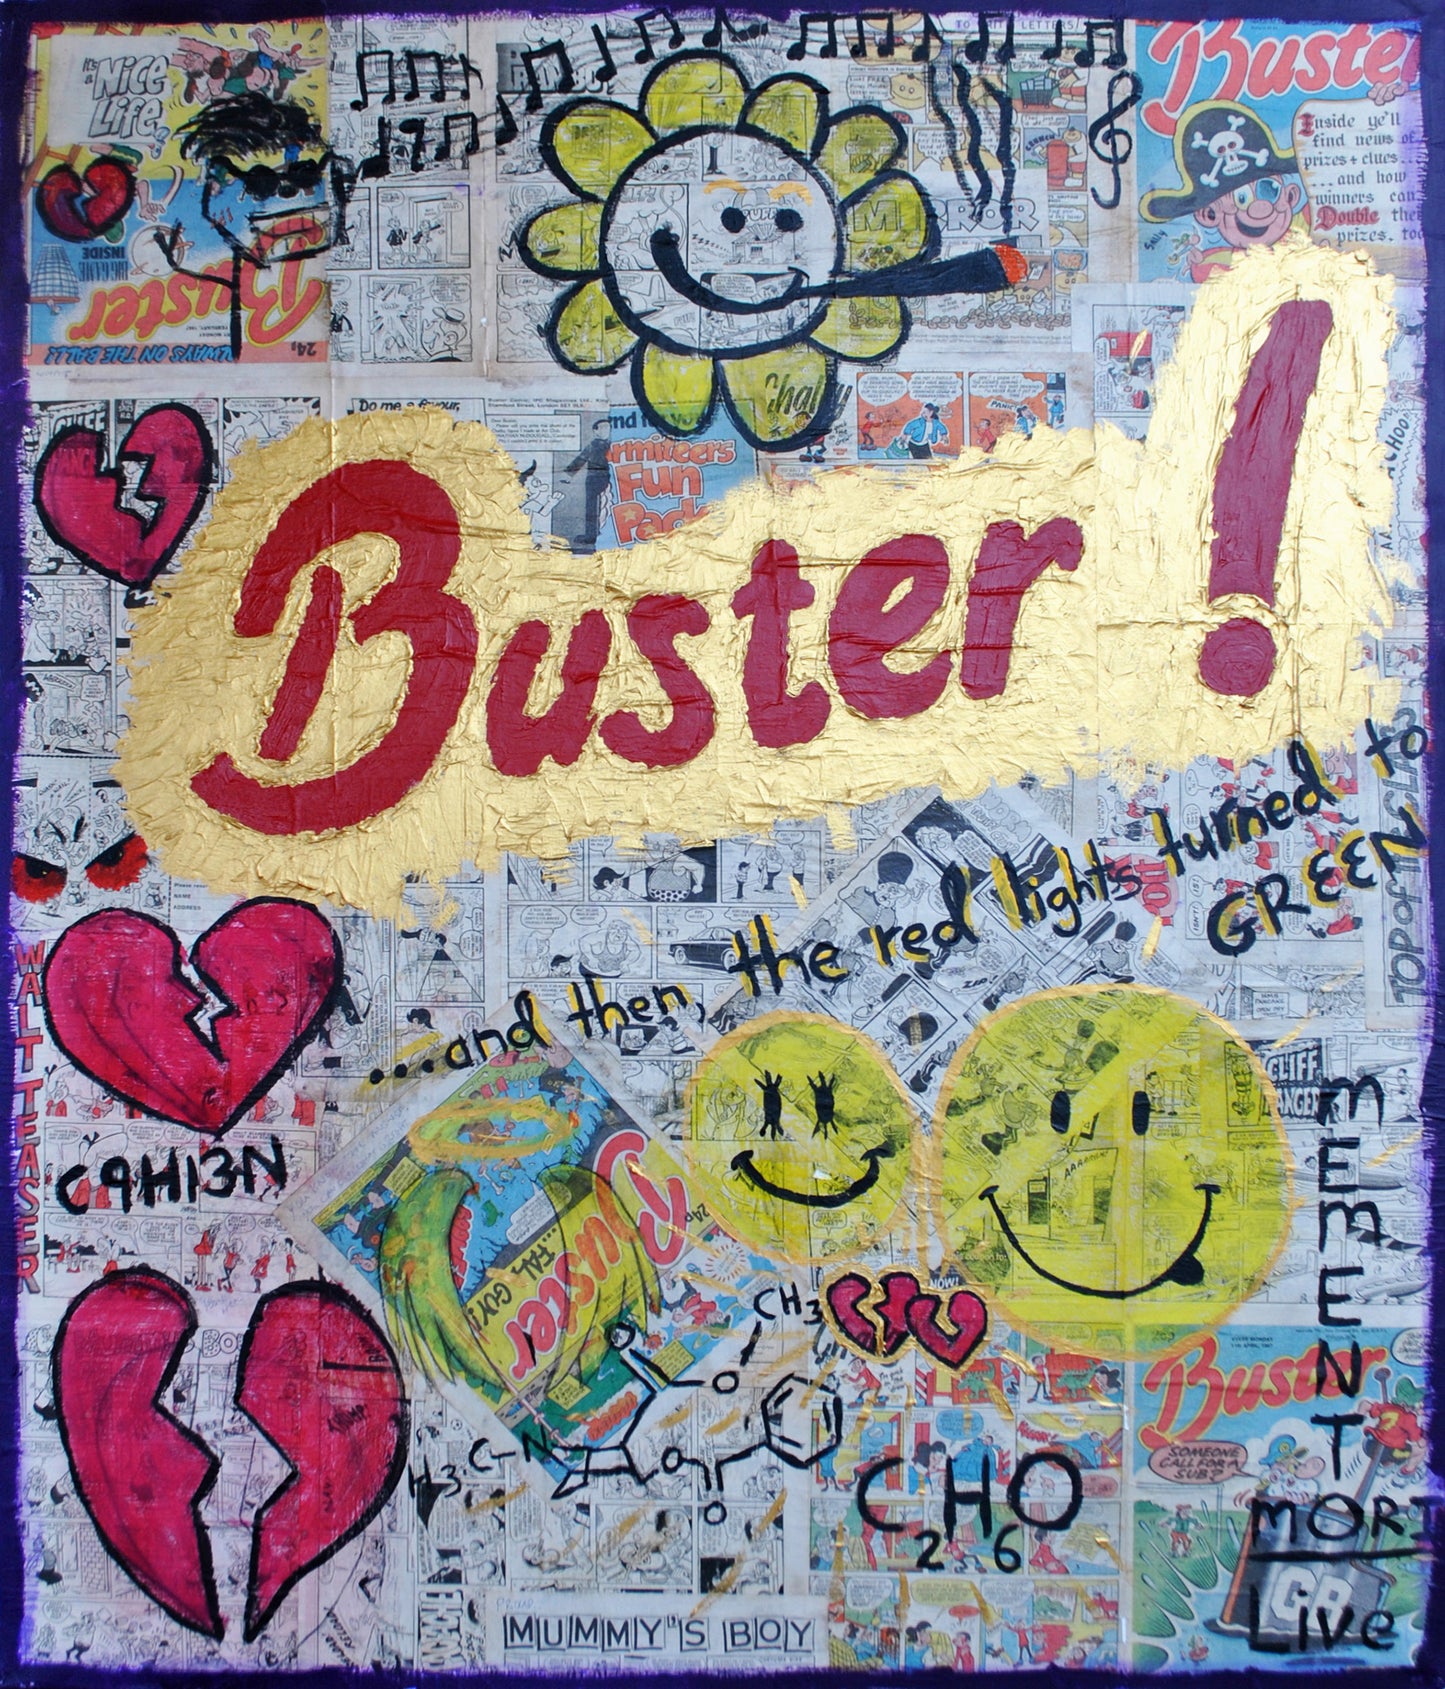 Buster by James Marshall